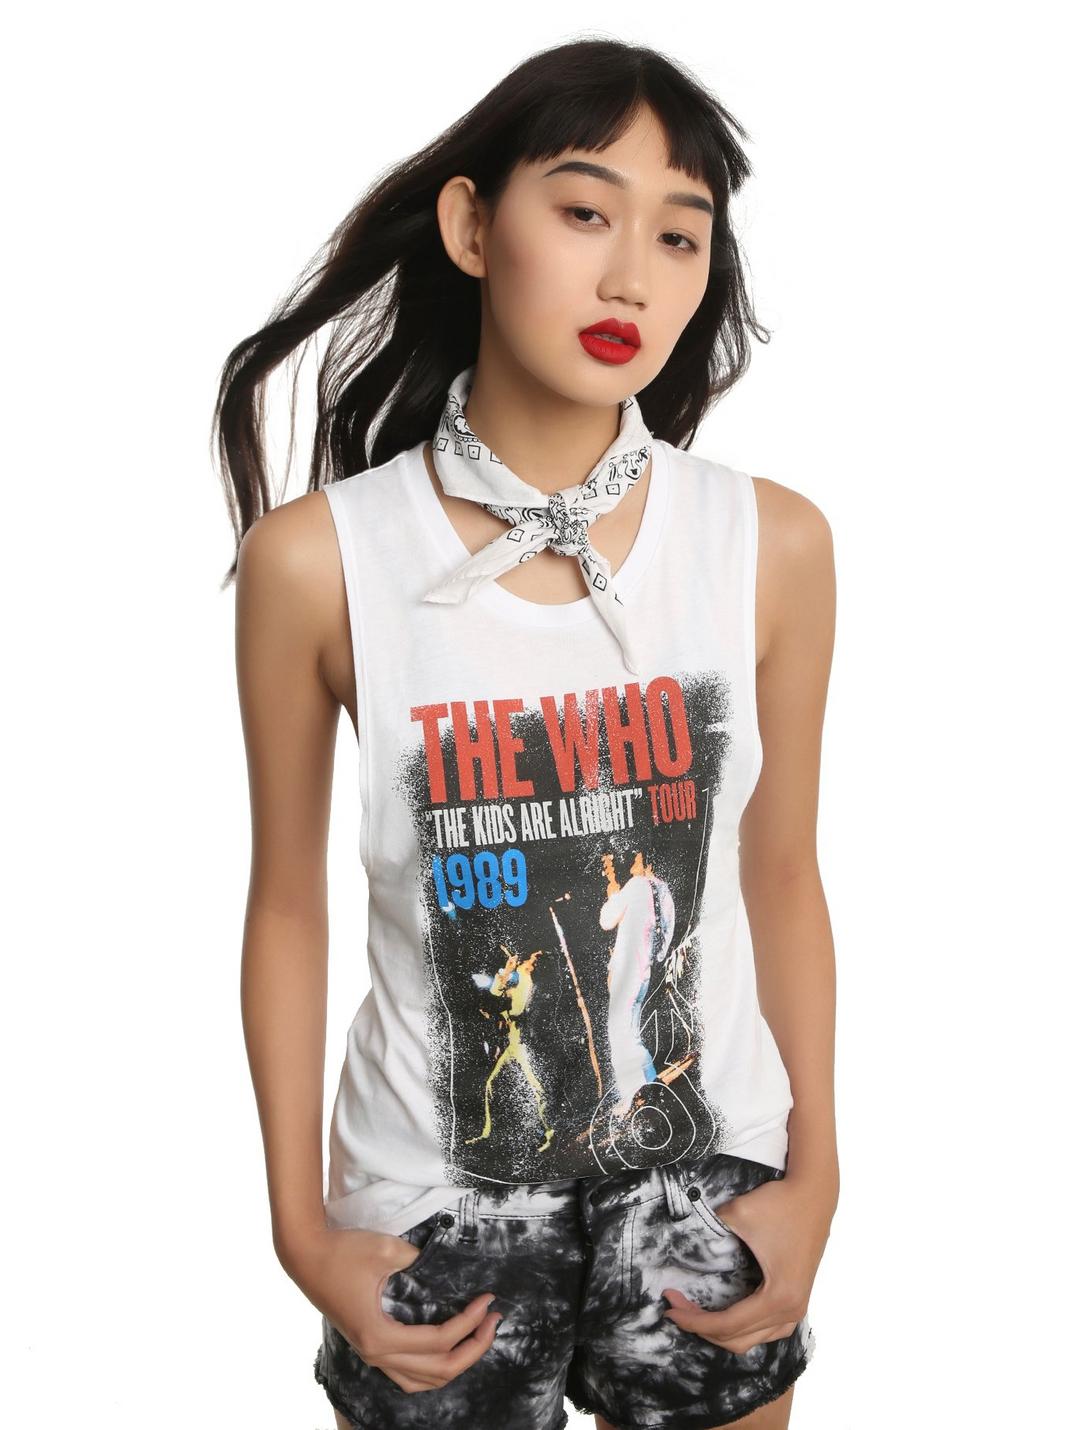 The Who The Kids Are Alright Tour 1989 Girls Muscle Top, BLACK, hi-res